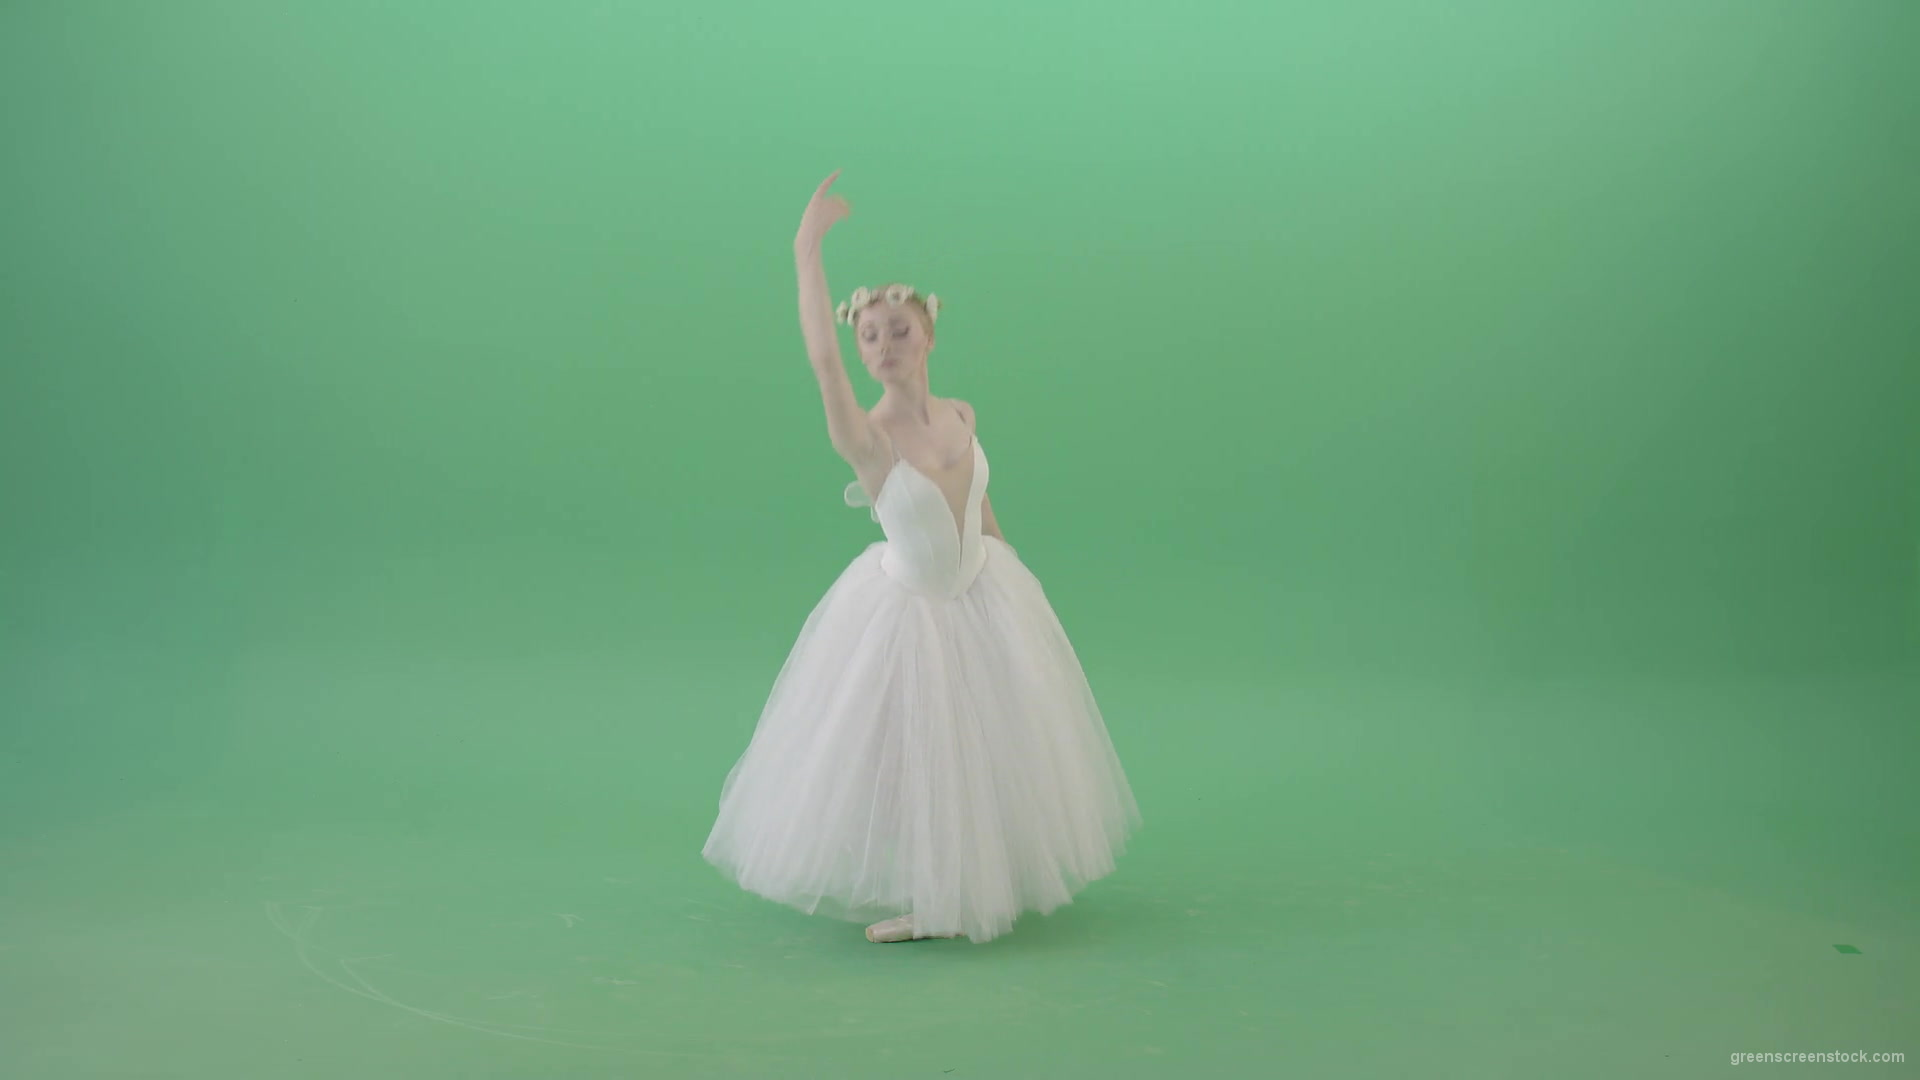 Ballet-Art-Princes-making-royal-regards-in-white-wedding-dress-isolated-on-green-screen-4K-Video-Footage-1920_004 Green Screen Stock